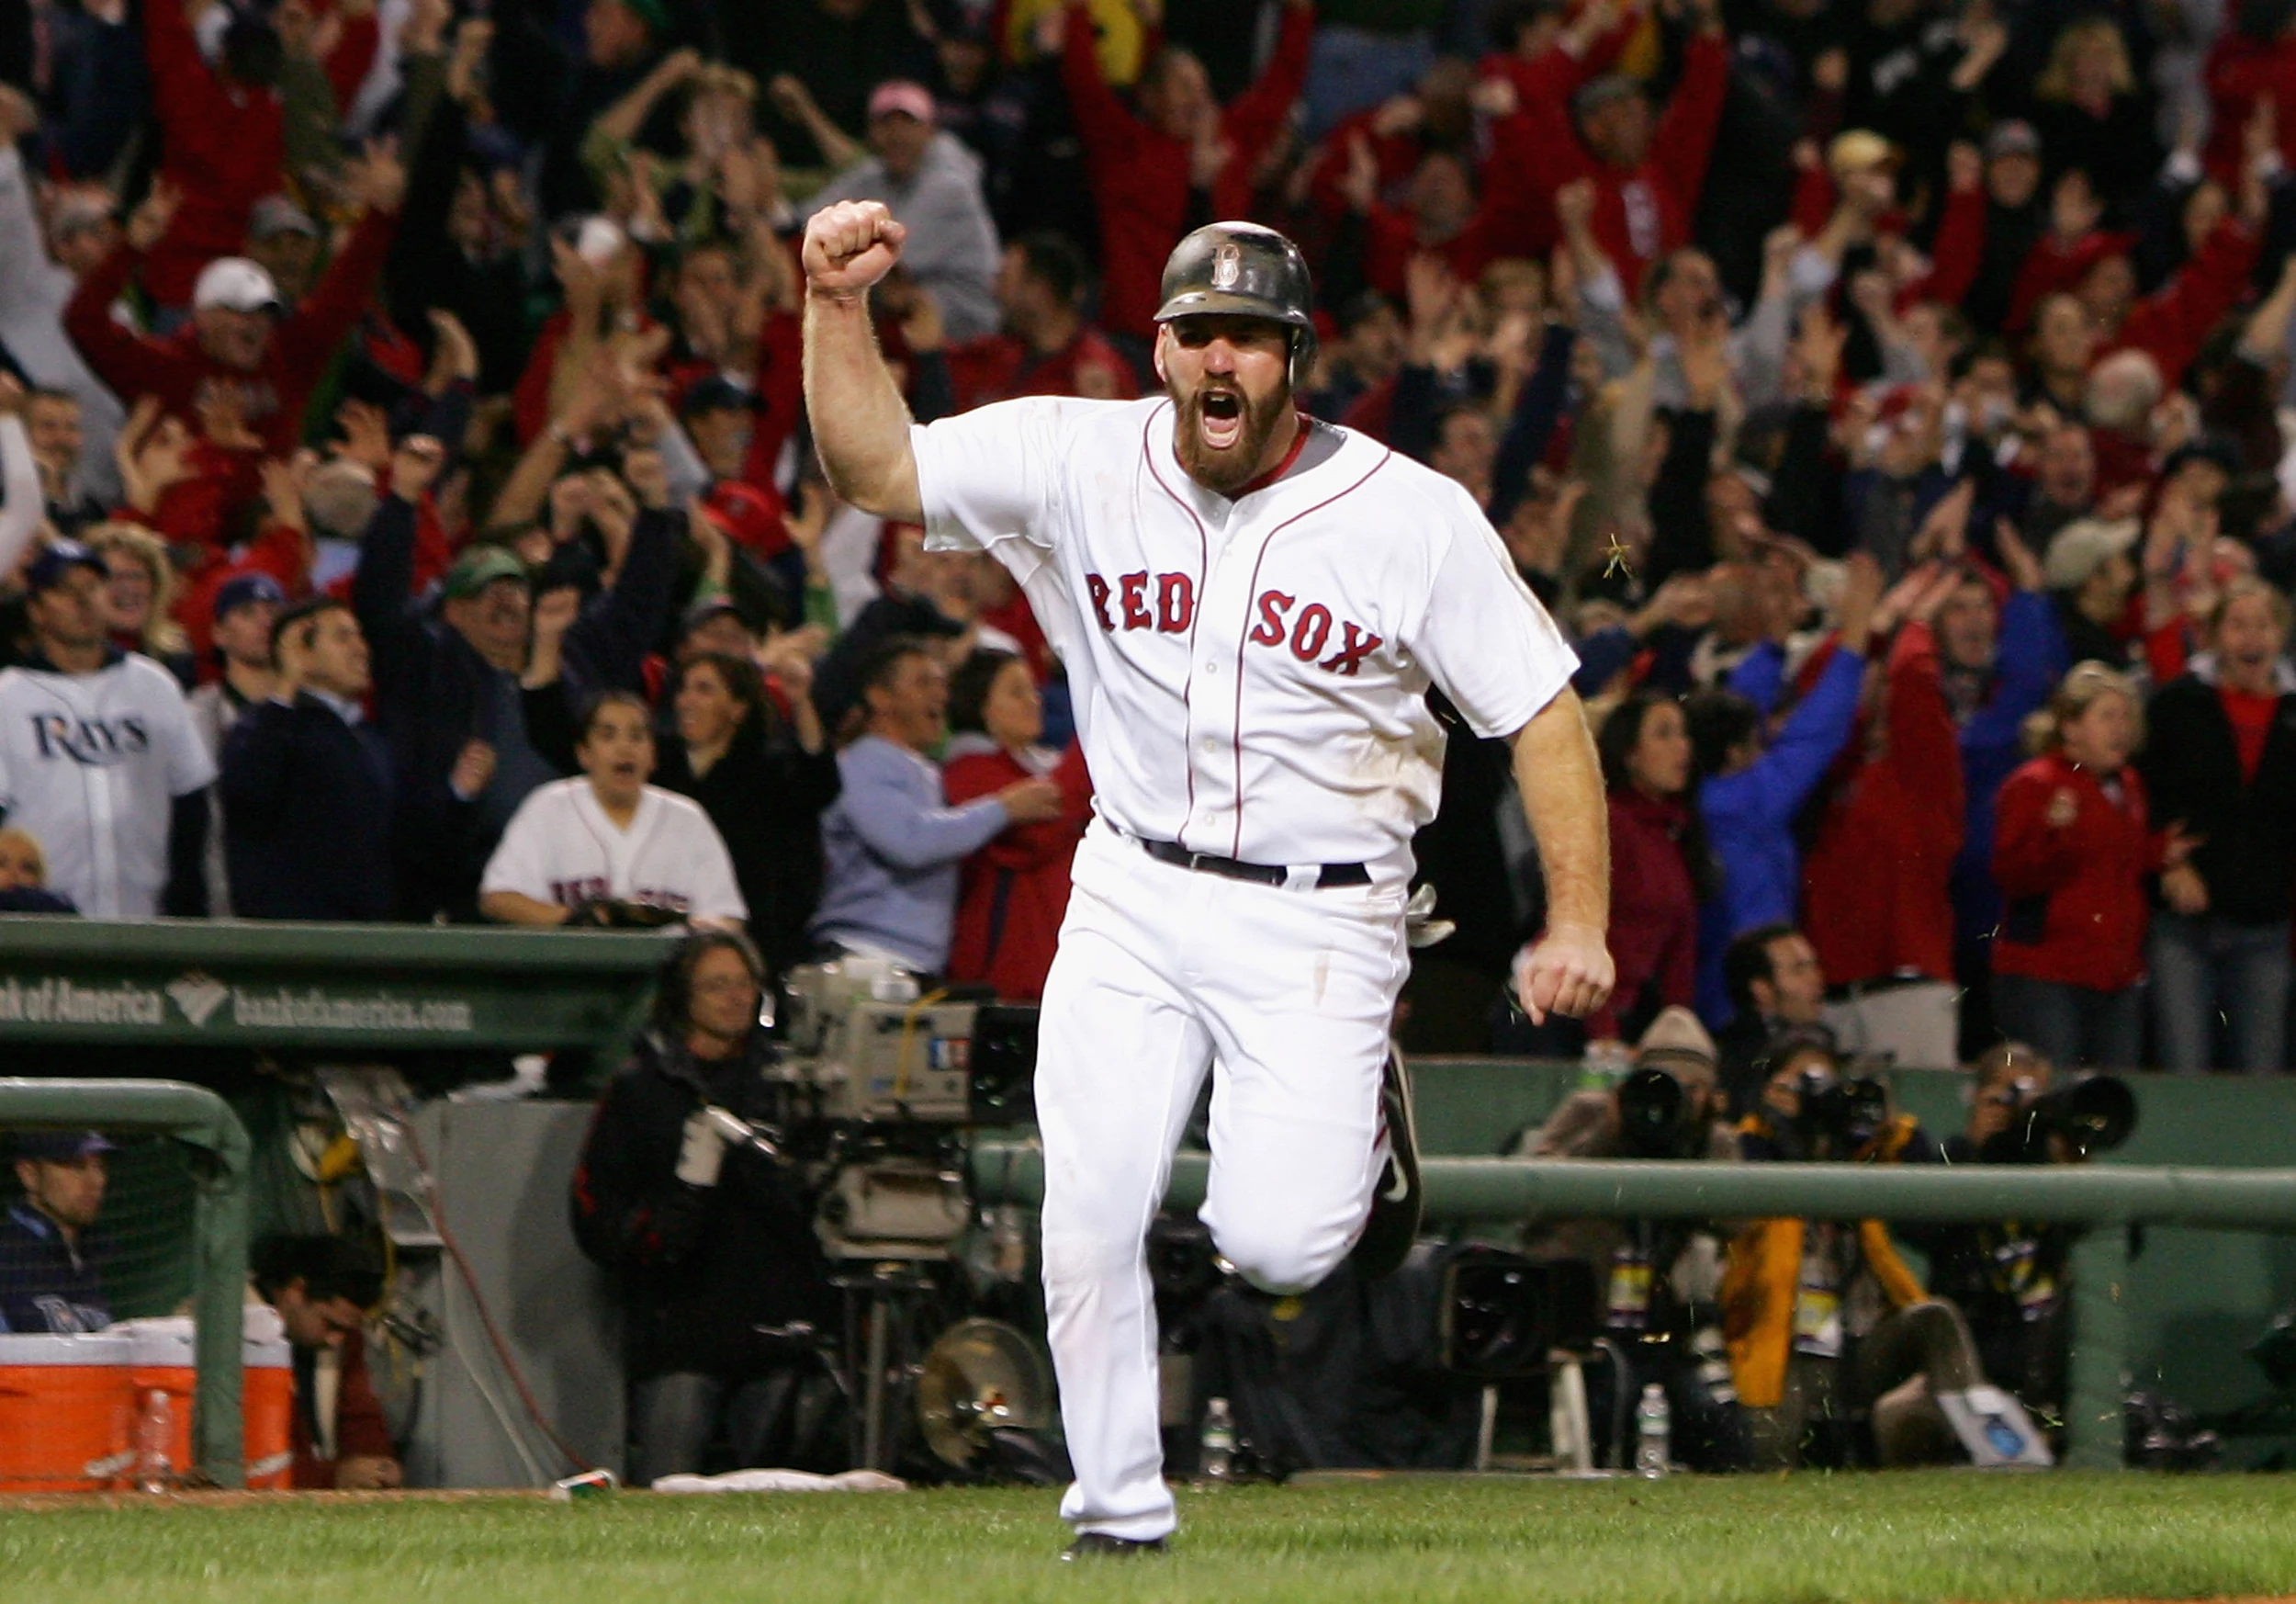 teenagere hovedvej fusion Kevin Youkilis Replacing Dennis Eckersley in Red Sox TV Booth